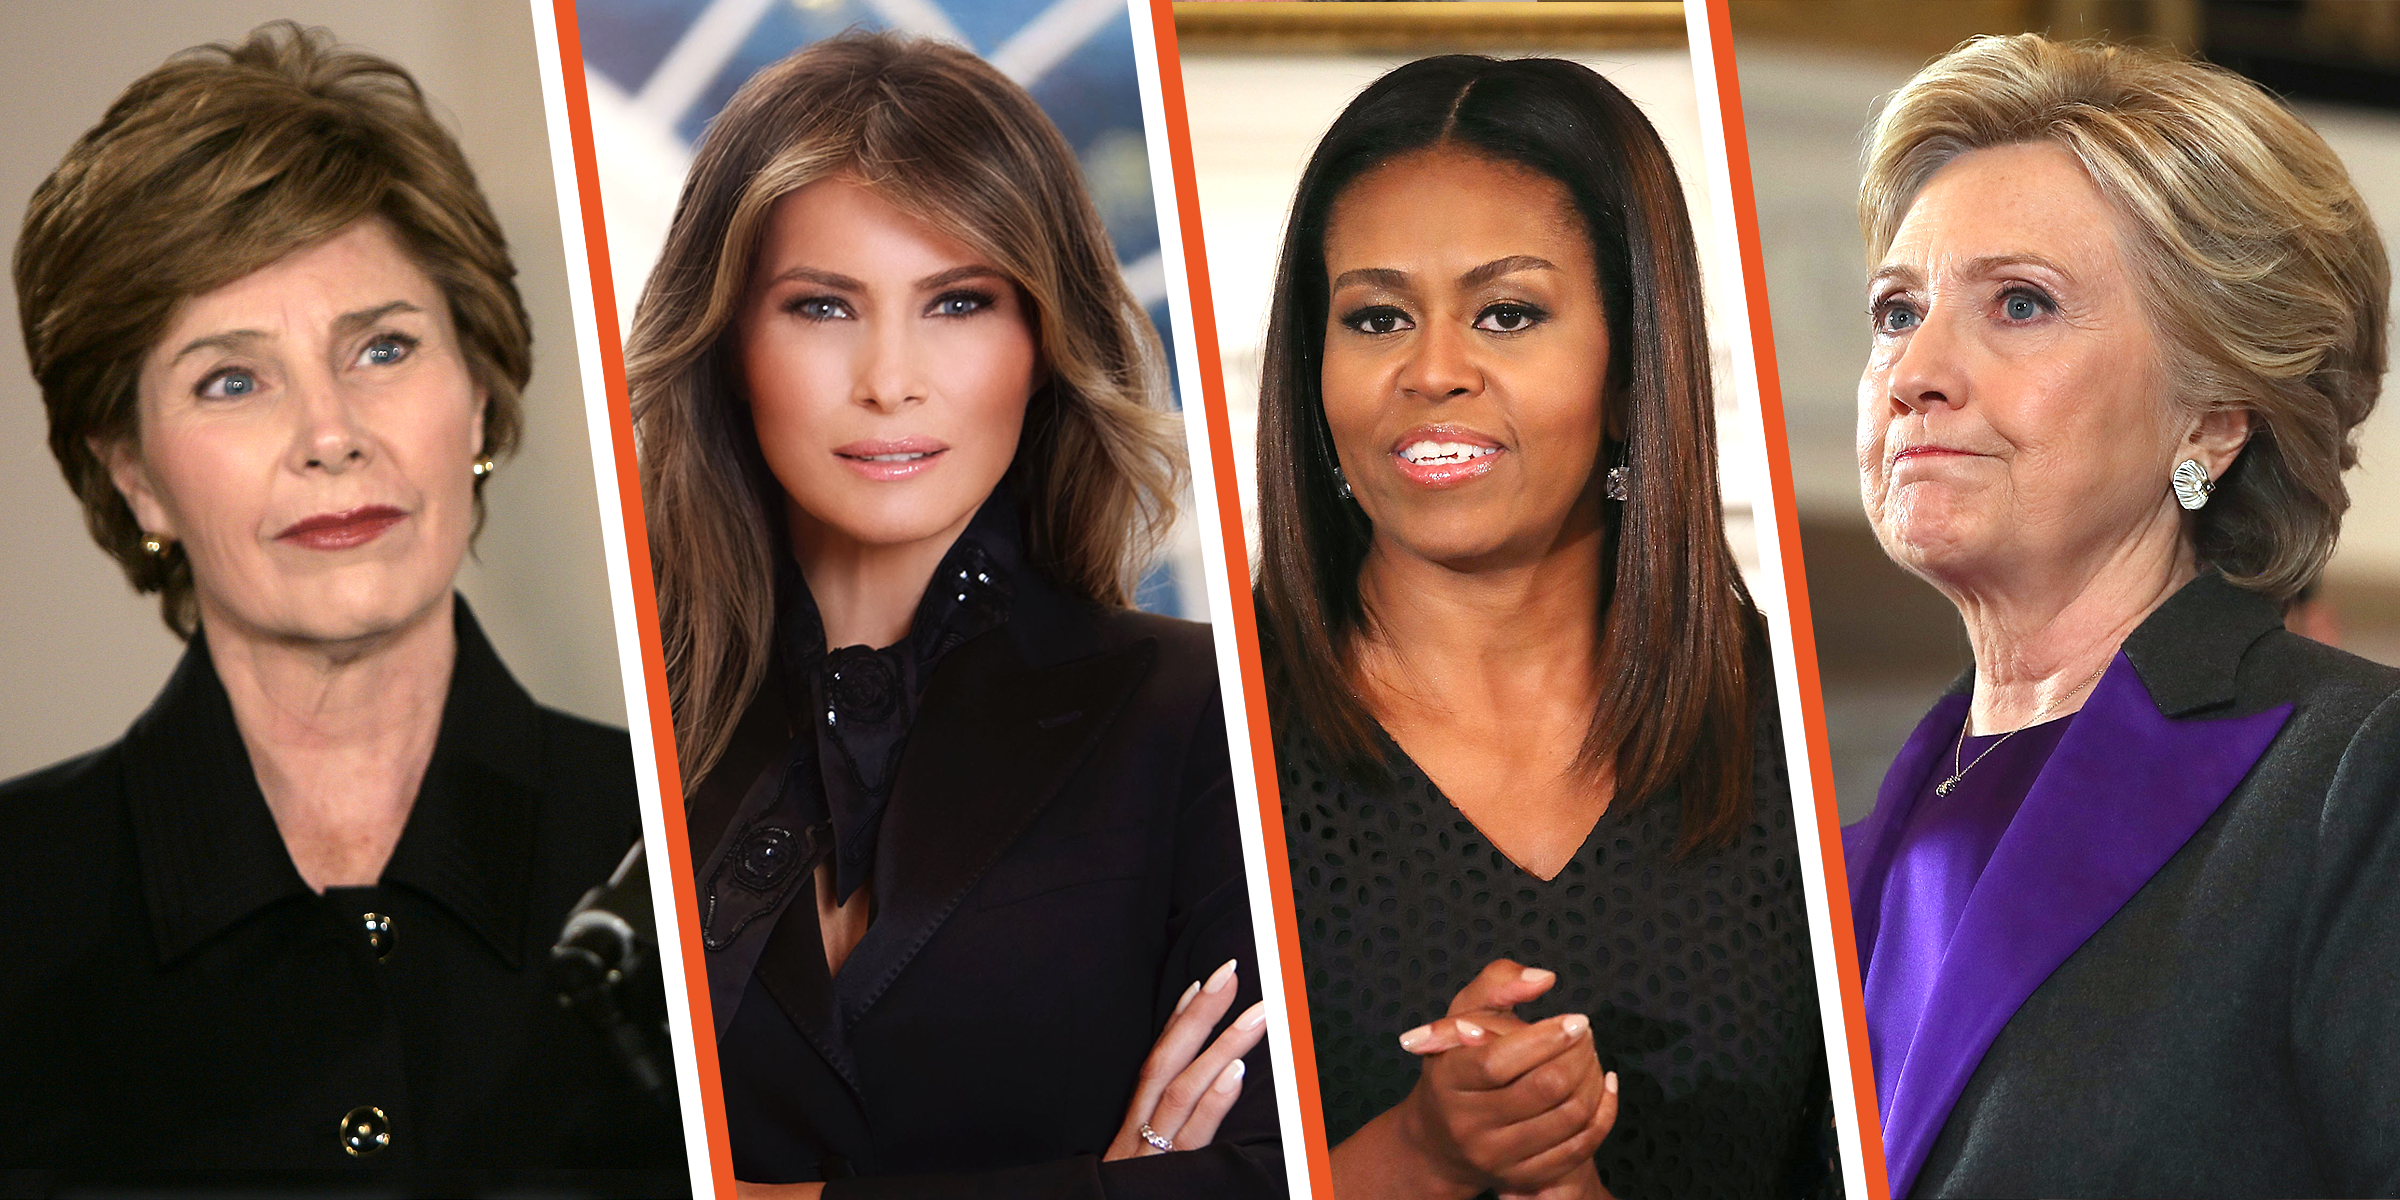 Laura Bush, Melania Trump, Michelle Obama, and Hillary Clinton | Source: Getty Images